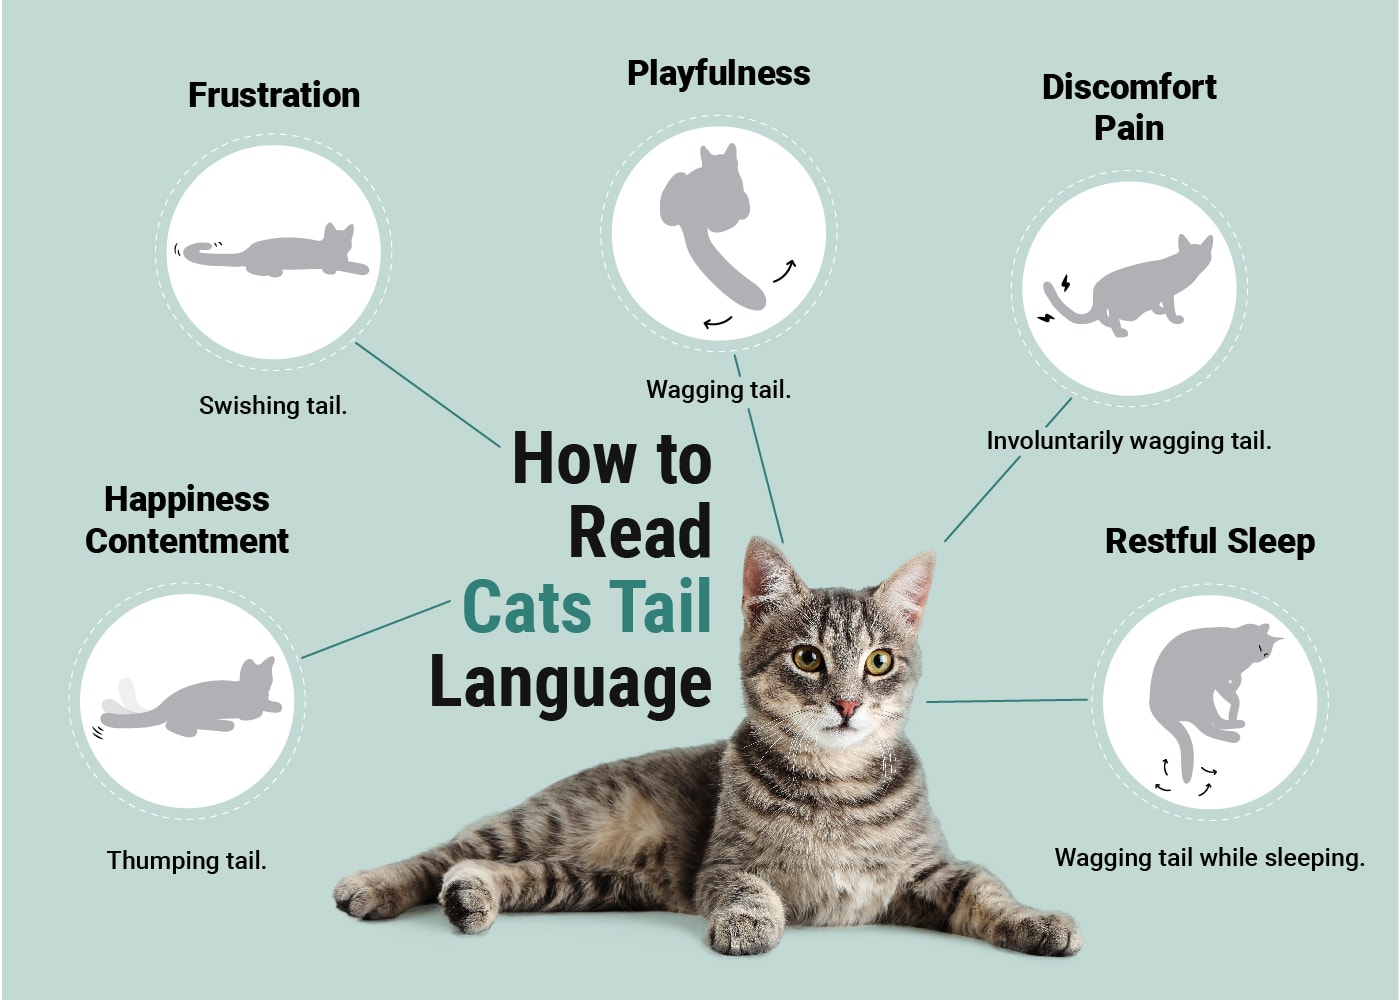 Why Do Cats Wag Their Tails While Lying Down? 5 Reasons Explained | Hepper